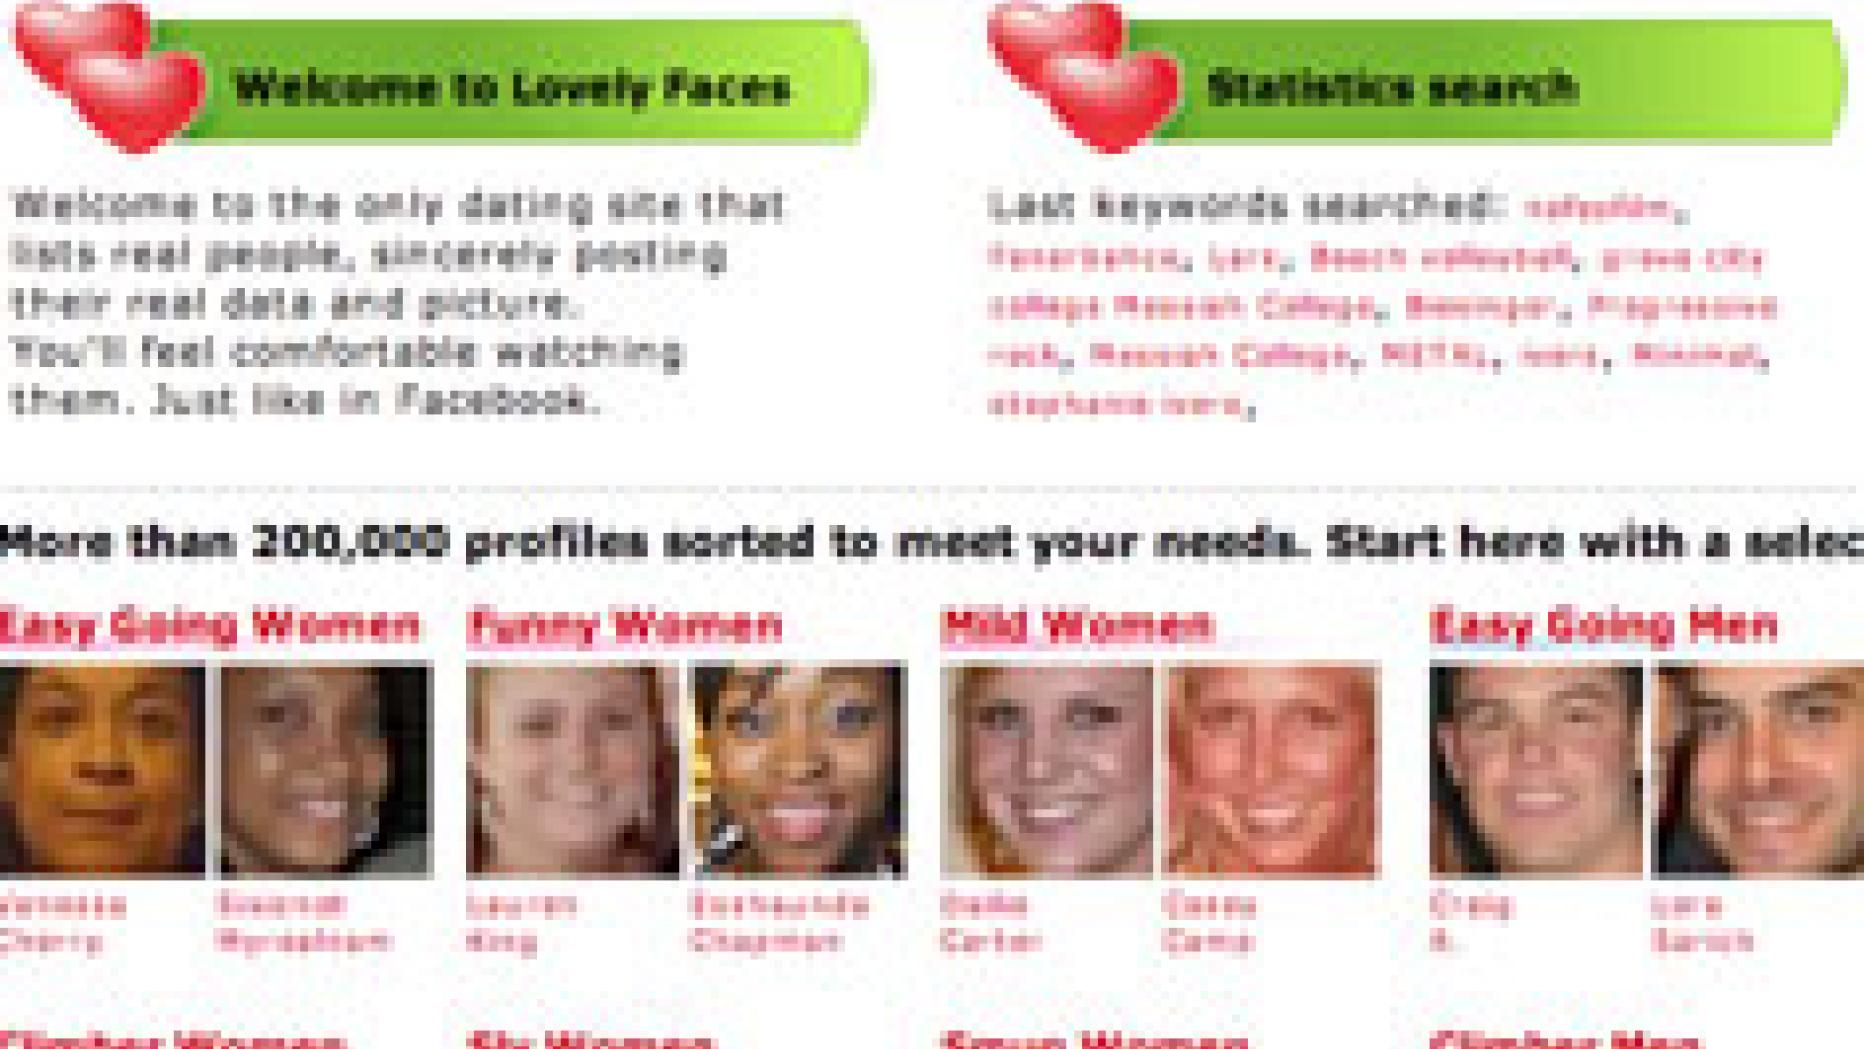 Dating site profile. Faces to Love. Dating up перевод